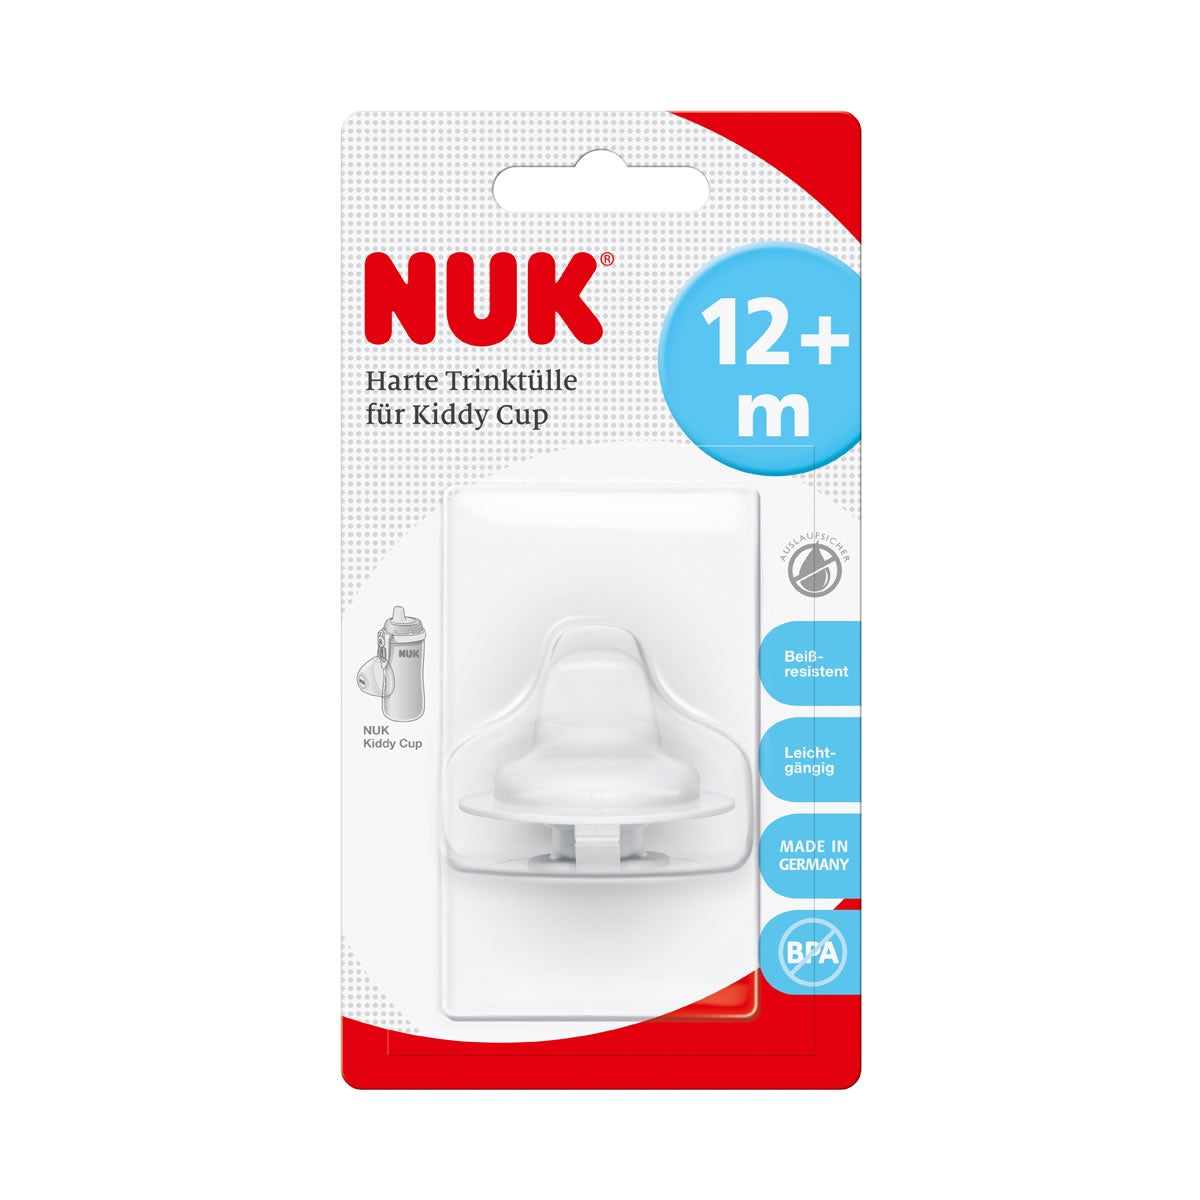 NUK Kiddy Cup Hard Spout Replacement